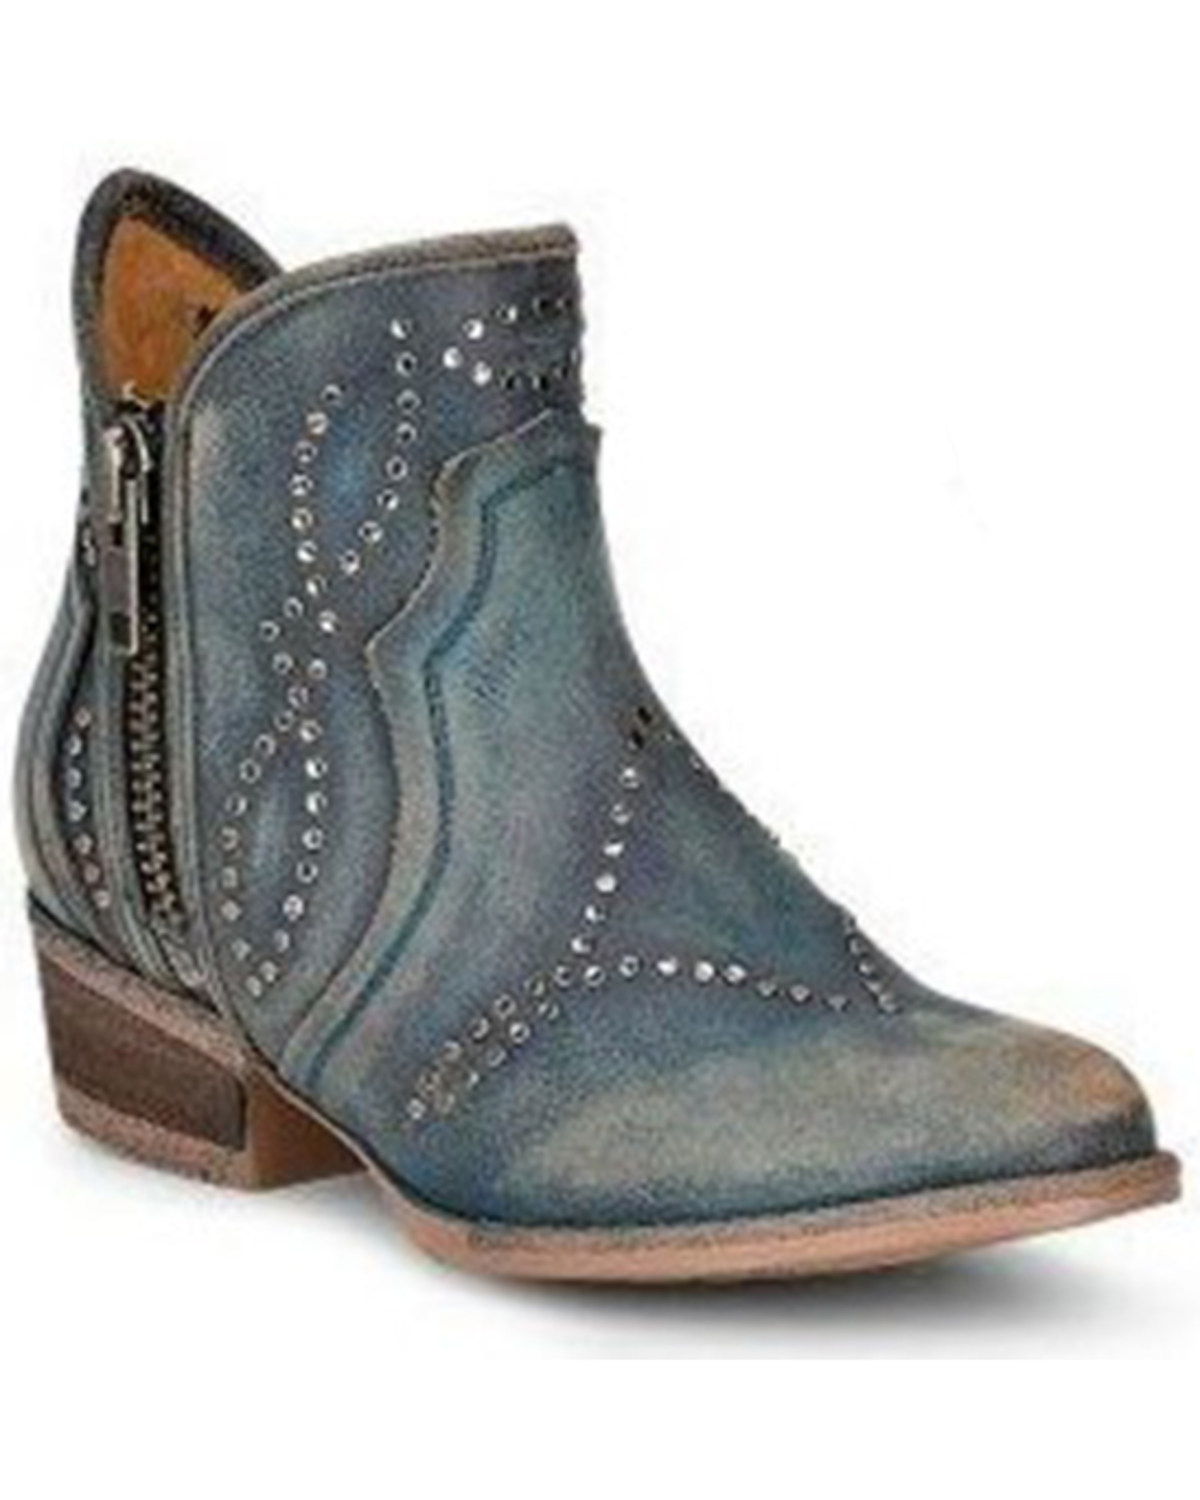 Corral Women's Distressed Studded Booties - Round Toe